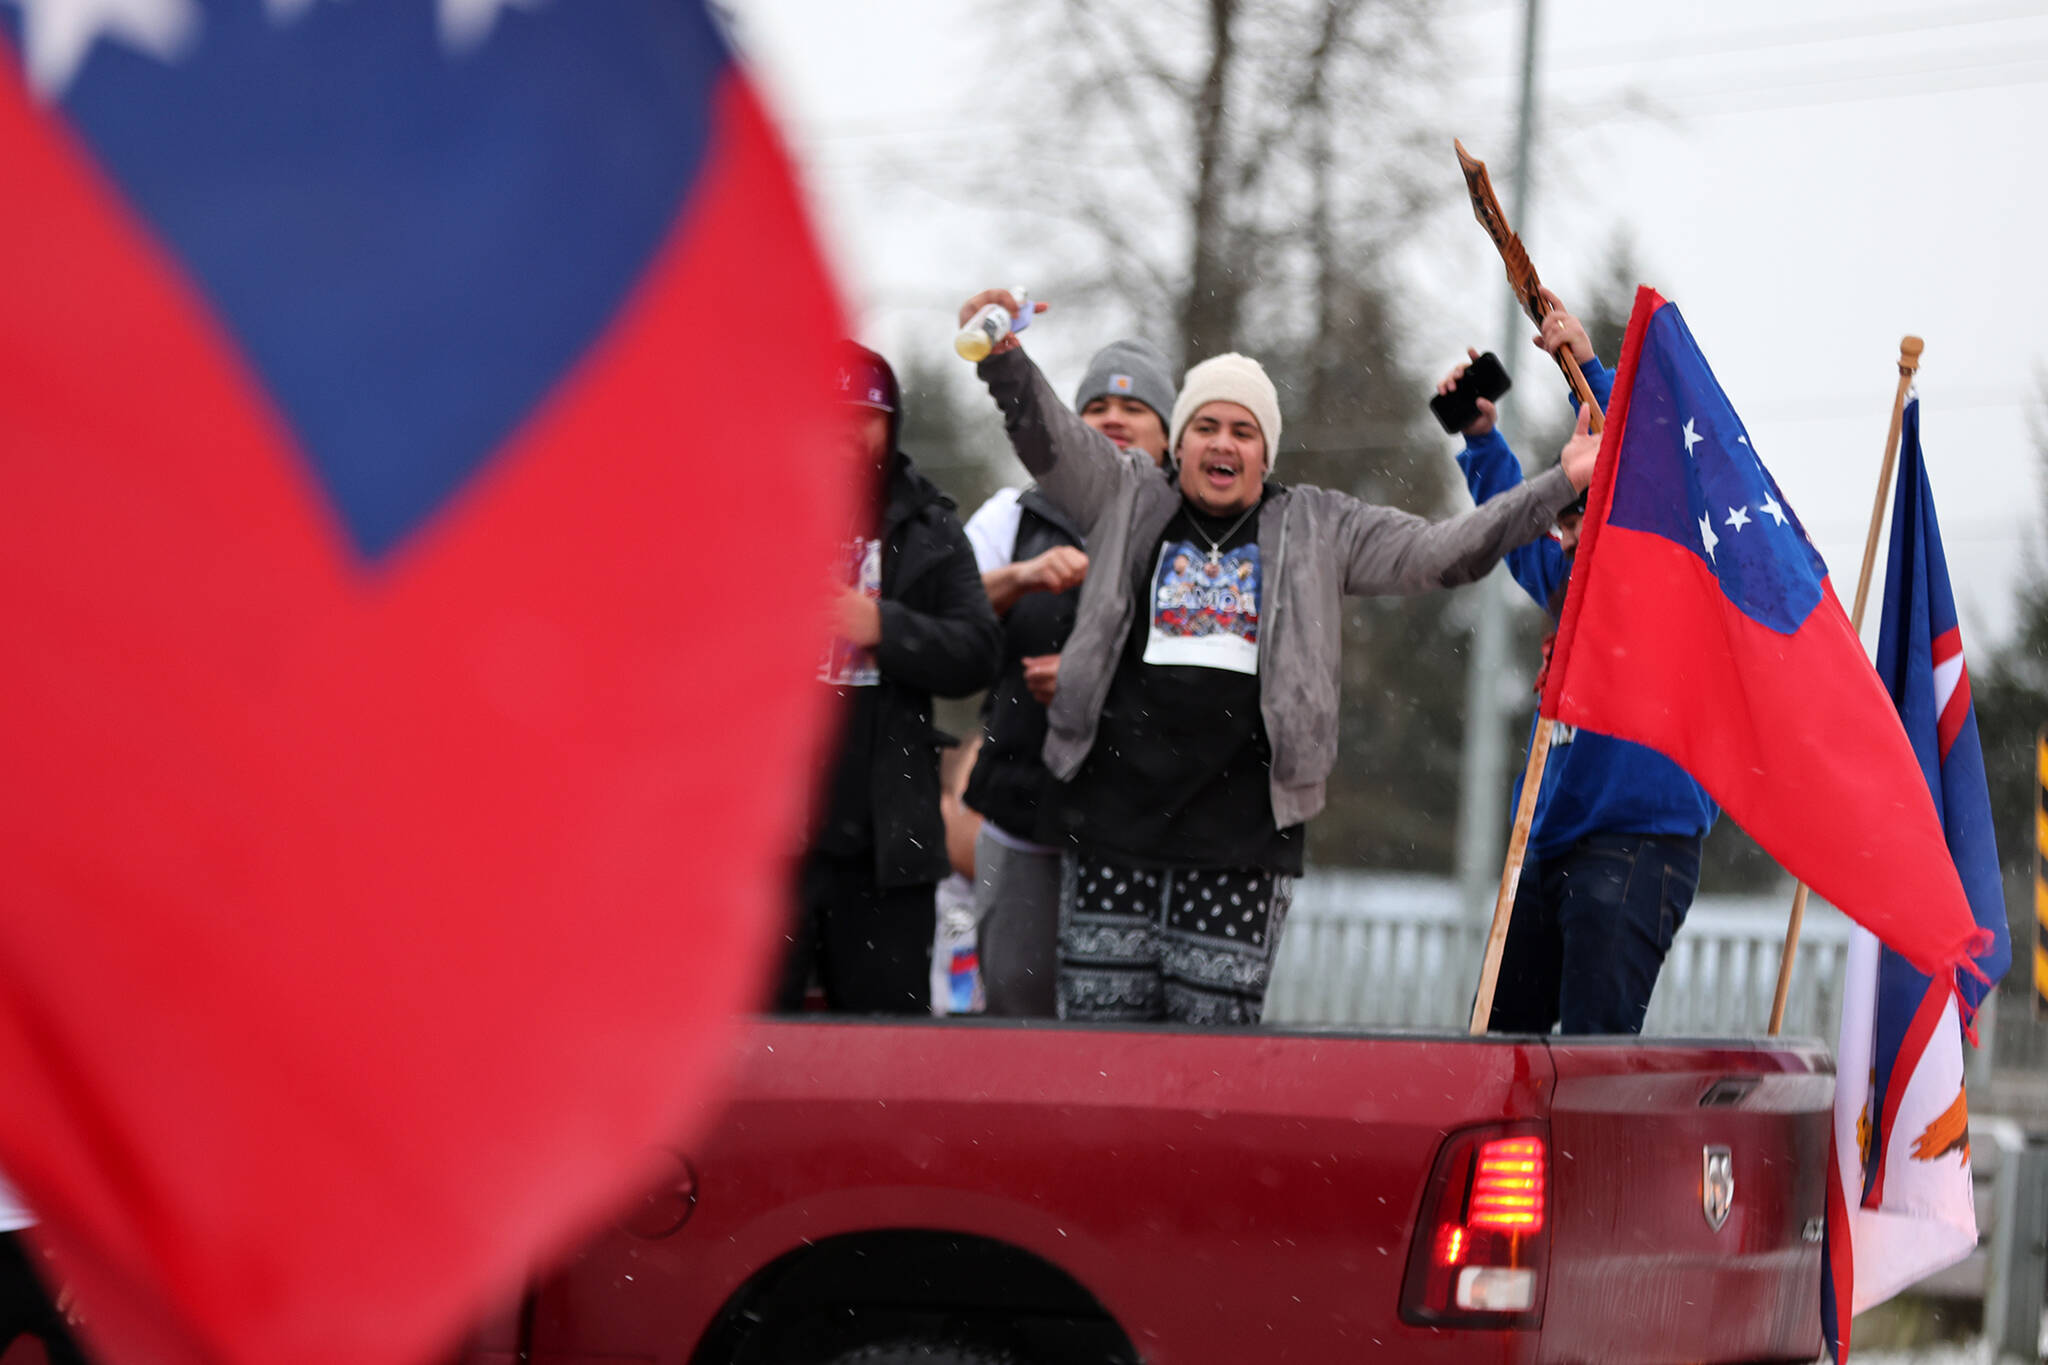 Rugby fans celebrate Samoa’s Rugby League World Cup run that ended Saturday with a loss to Australia in the finals. (Ben Hohenstatt / Juneau Empire)